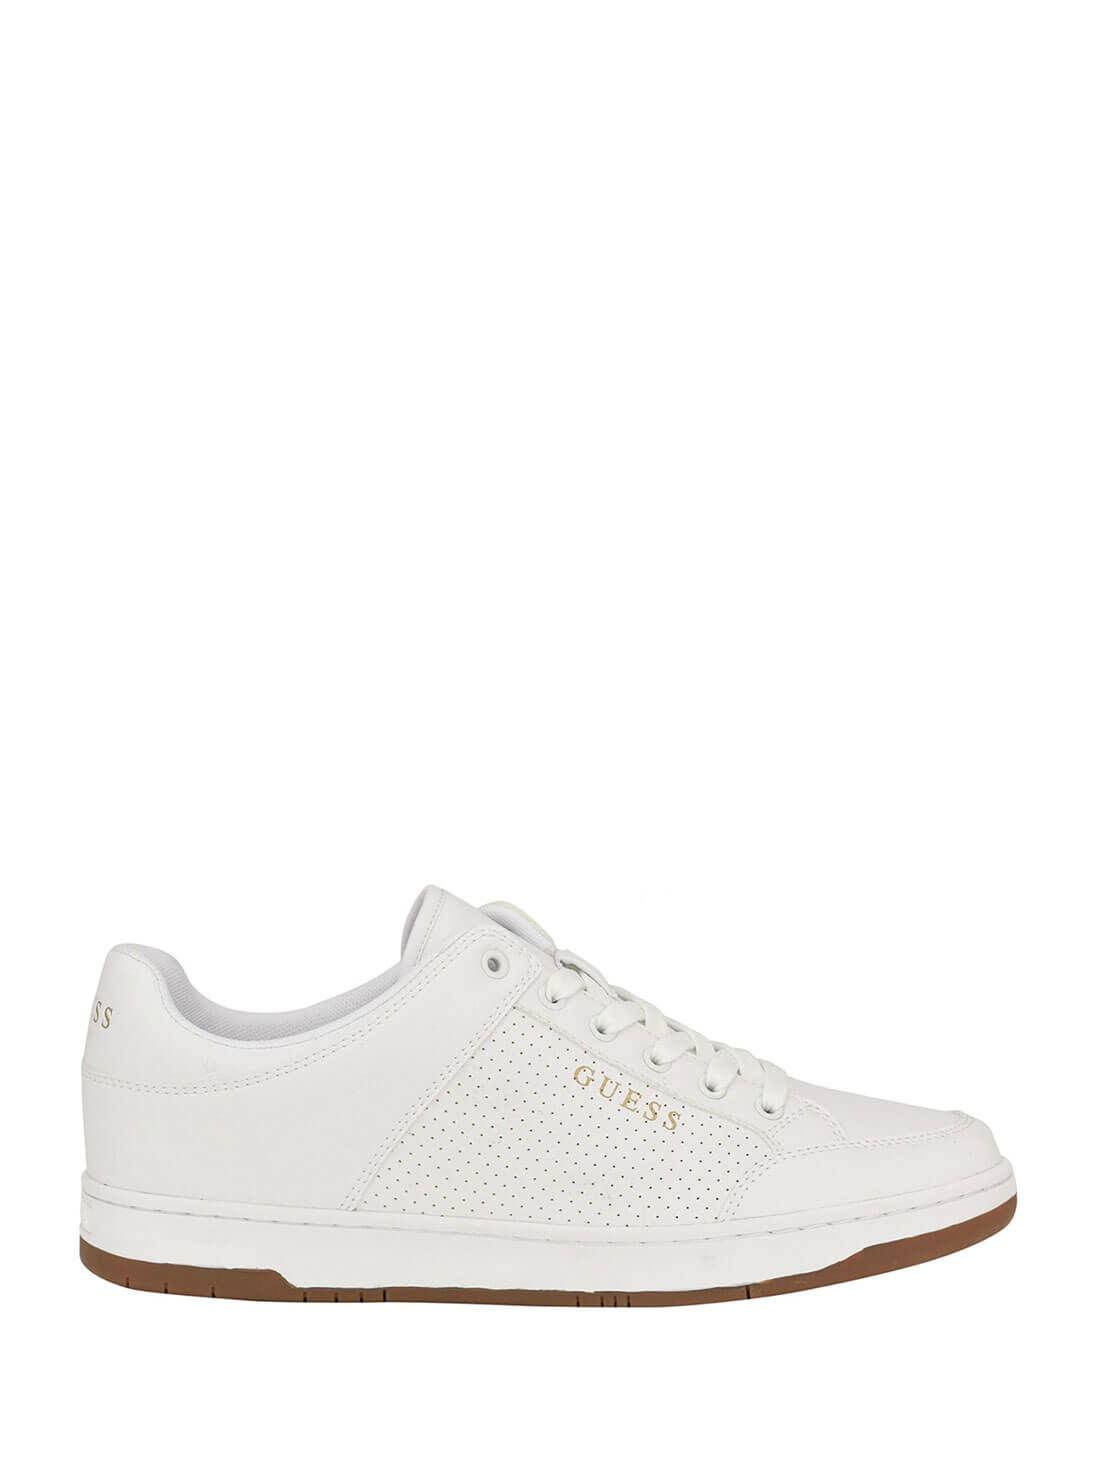 White Tempo Sneakers | GUESS Men's Shoes | side view